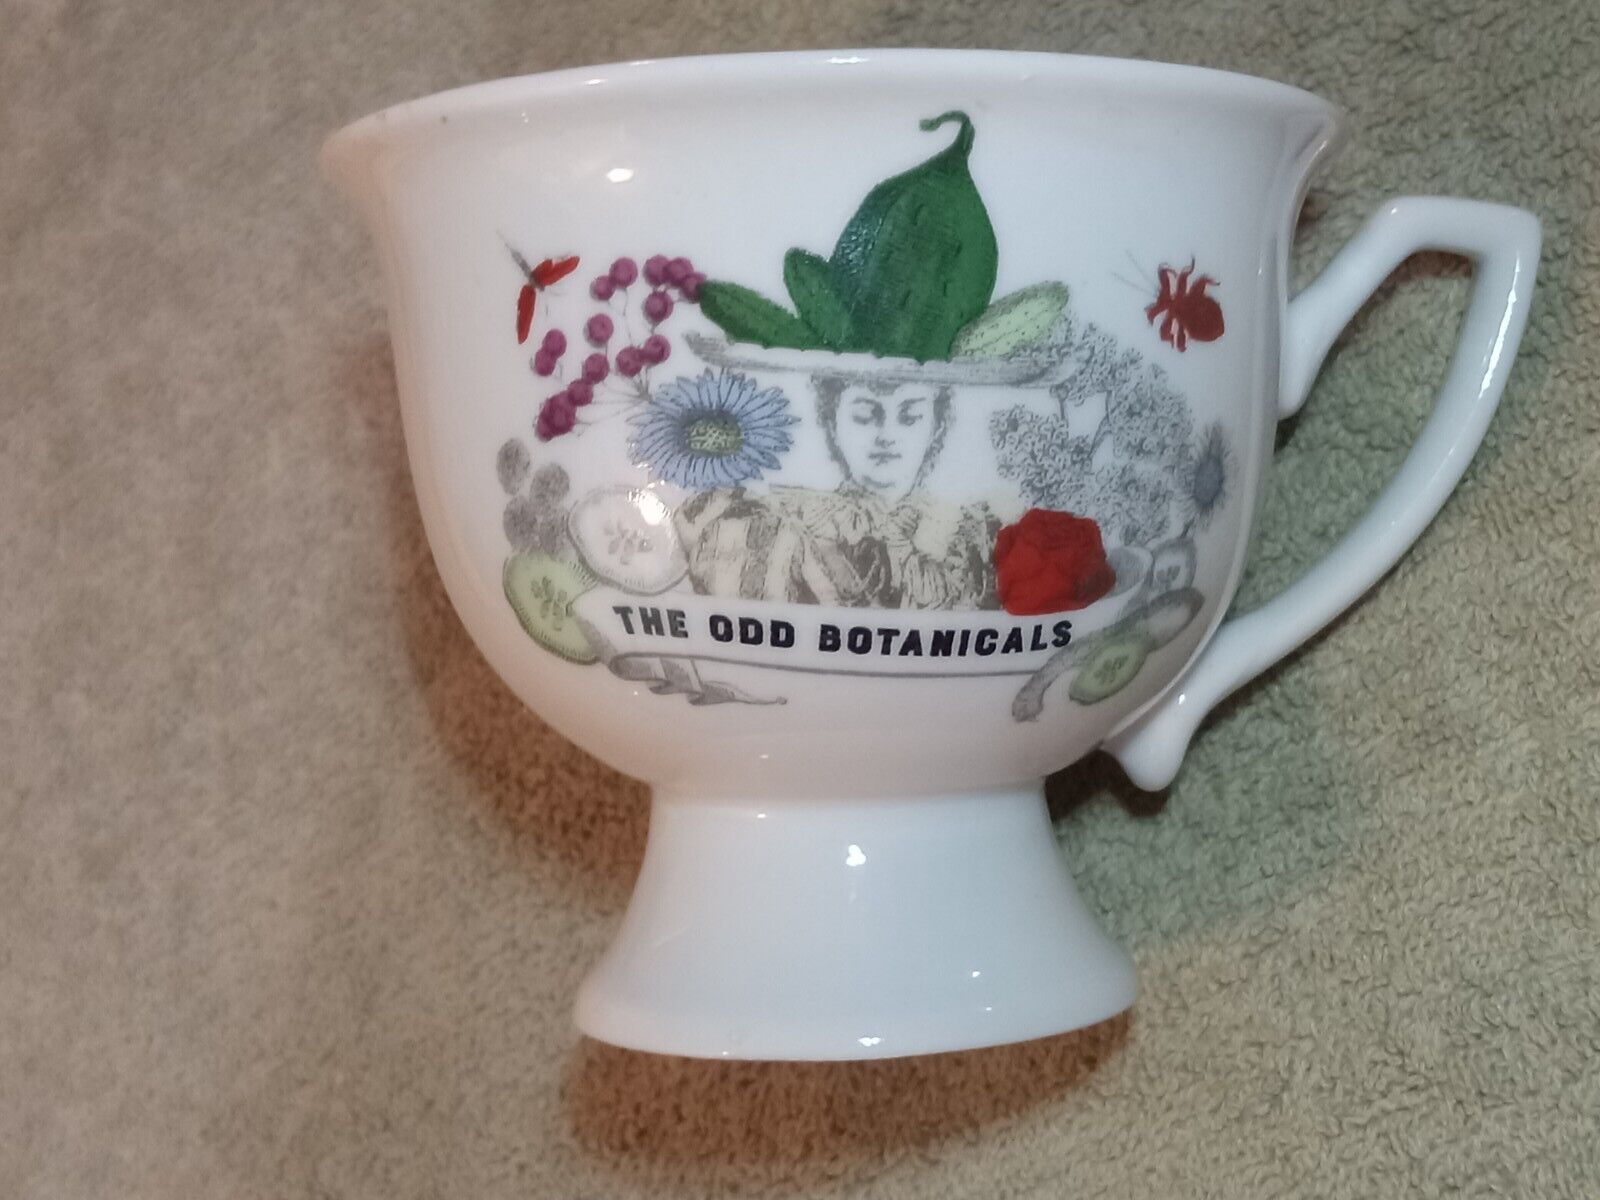 Hendricks Gin Limited Edition The Odd Botanicals Vintage China Gin Cup